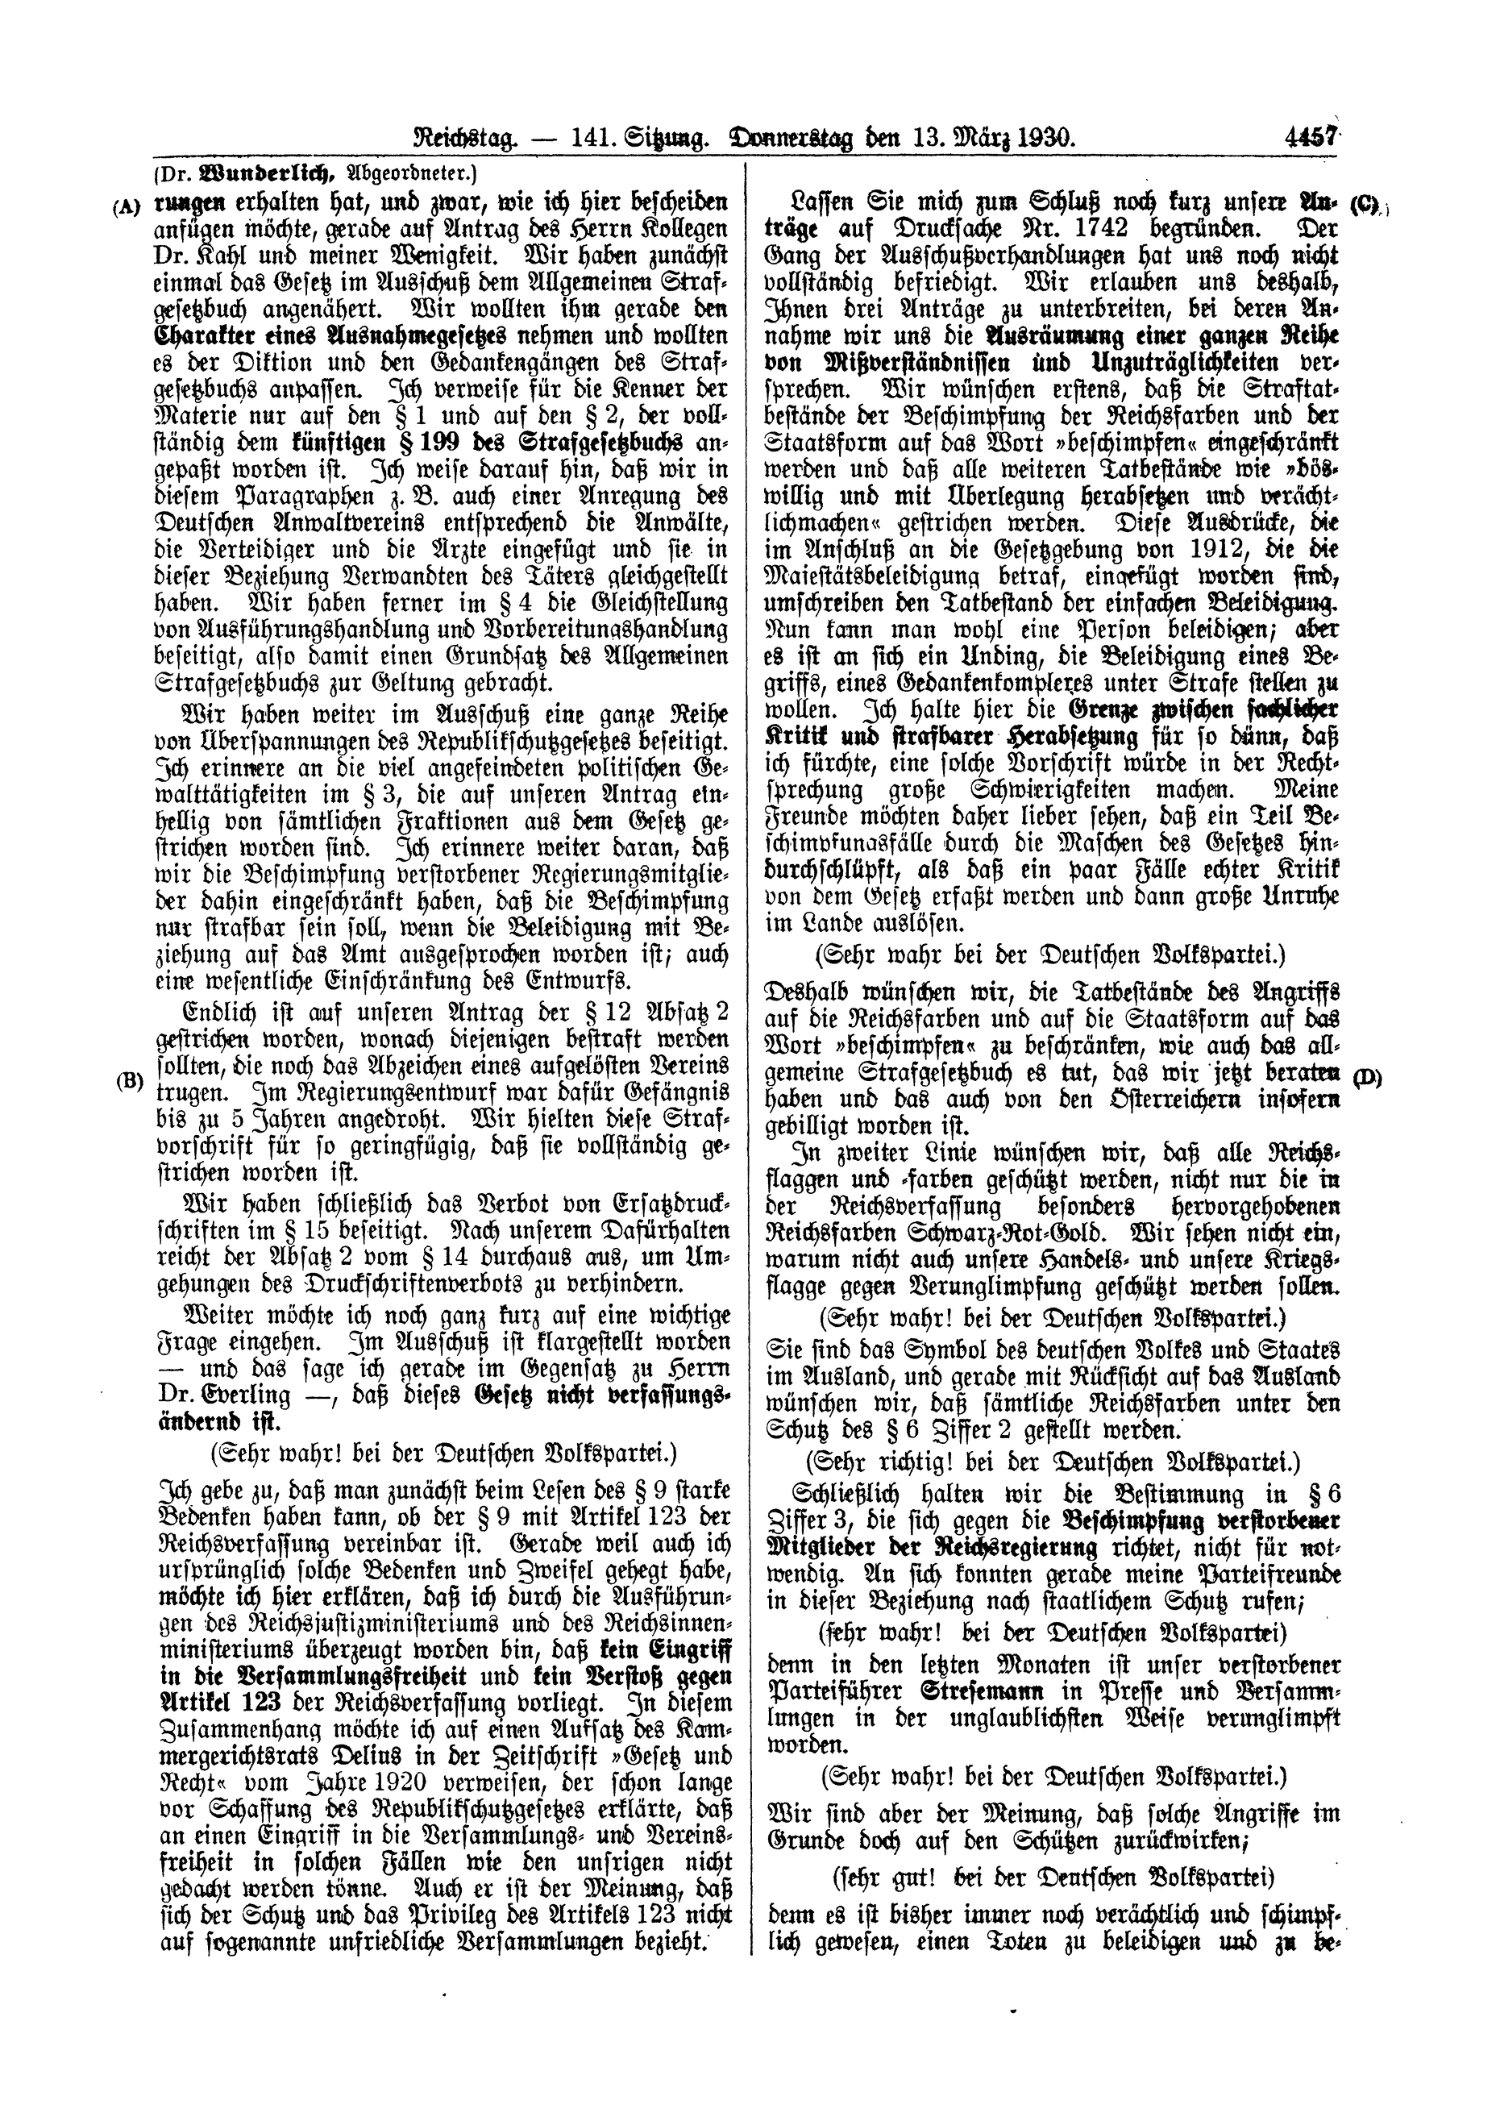 Scan of page 4457